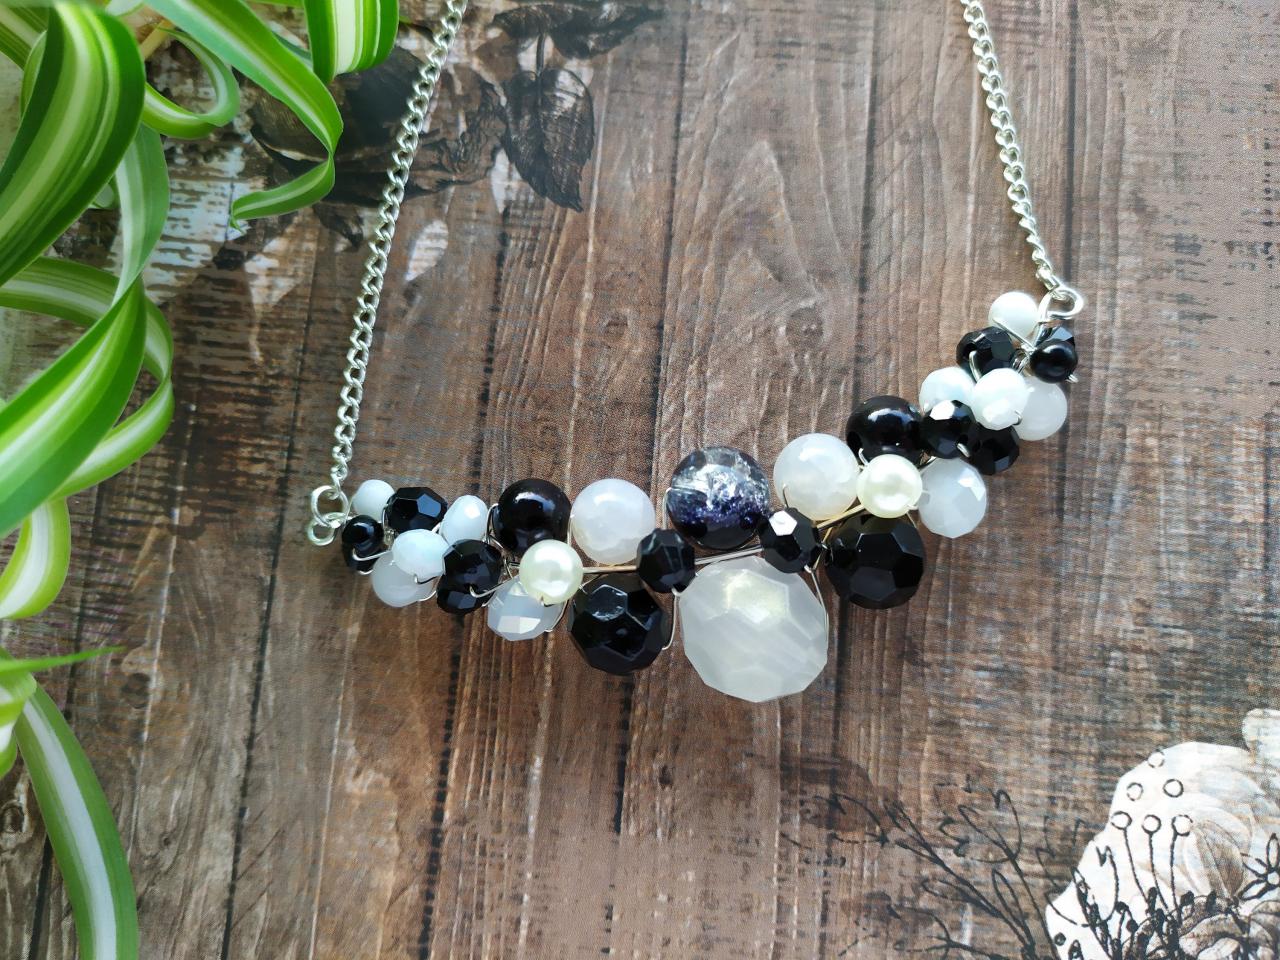 Black And White Necklace, White And Black Beaded Necklace, Wire Wrapped Silver Necklace, One Of A Kind Bohemian Necklace, Bib Necklace